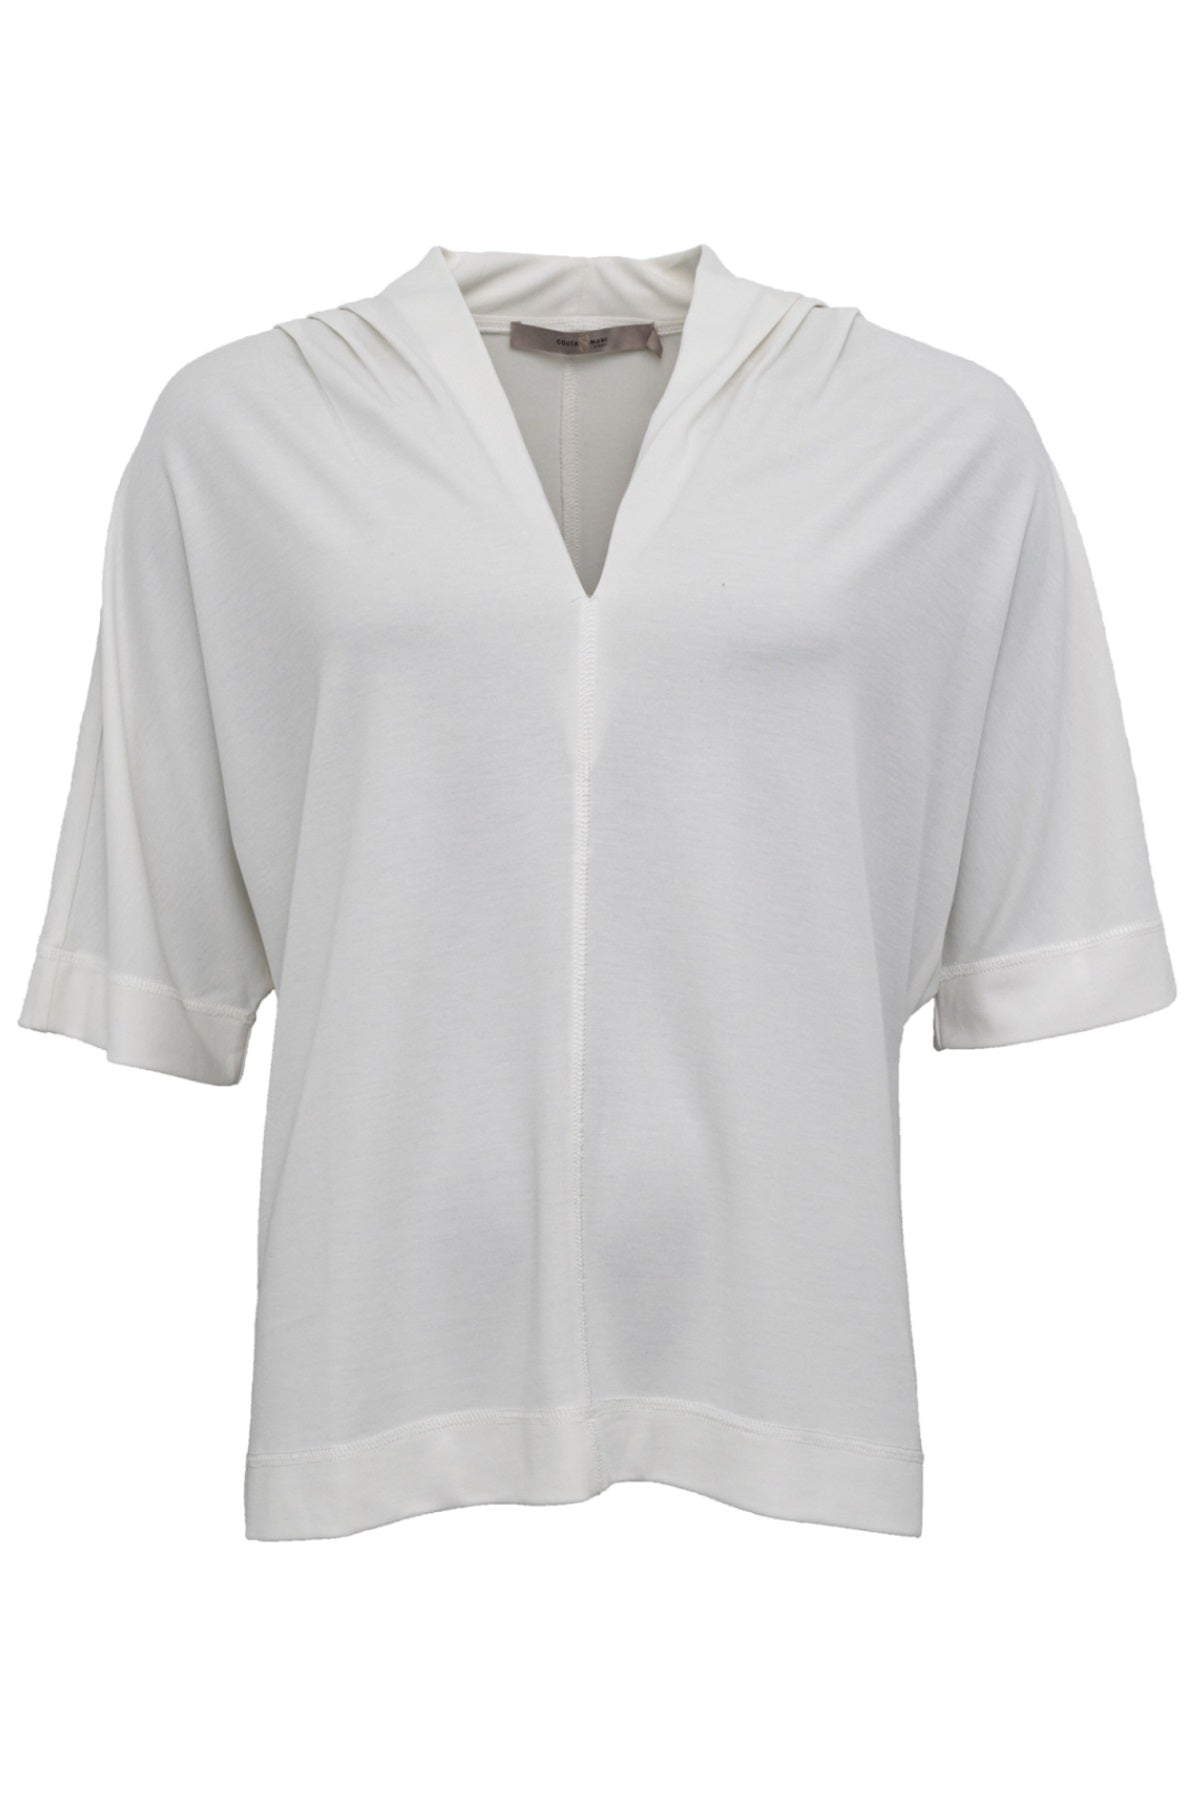 Costamani Claccy Blouse, White